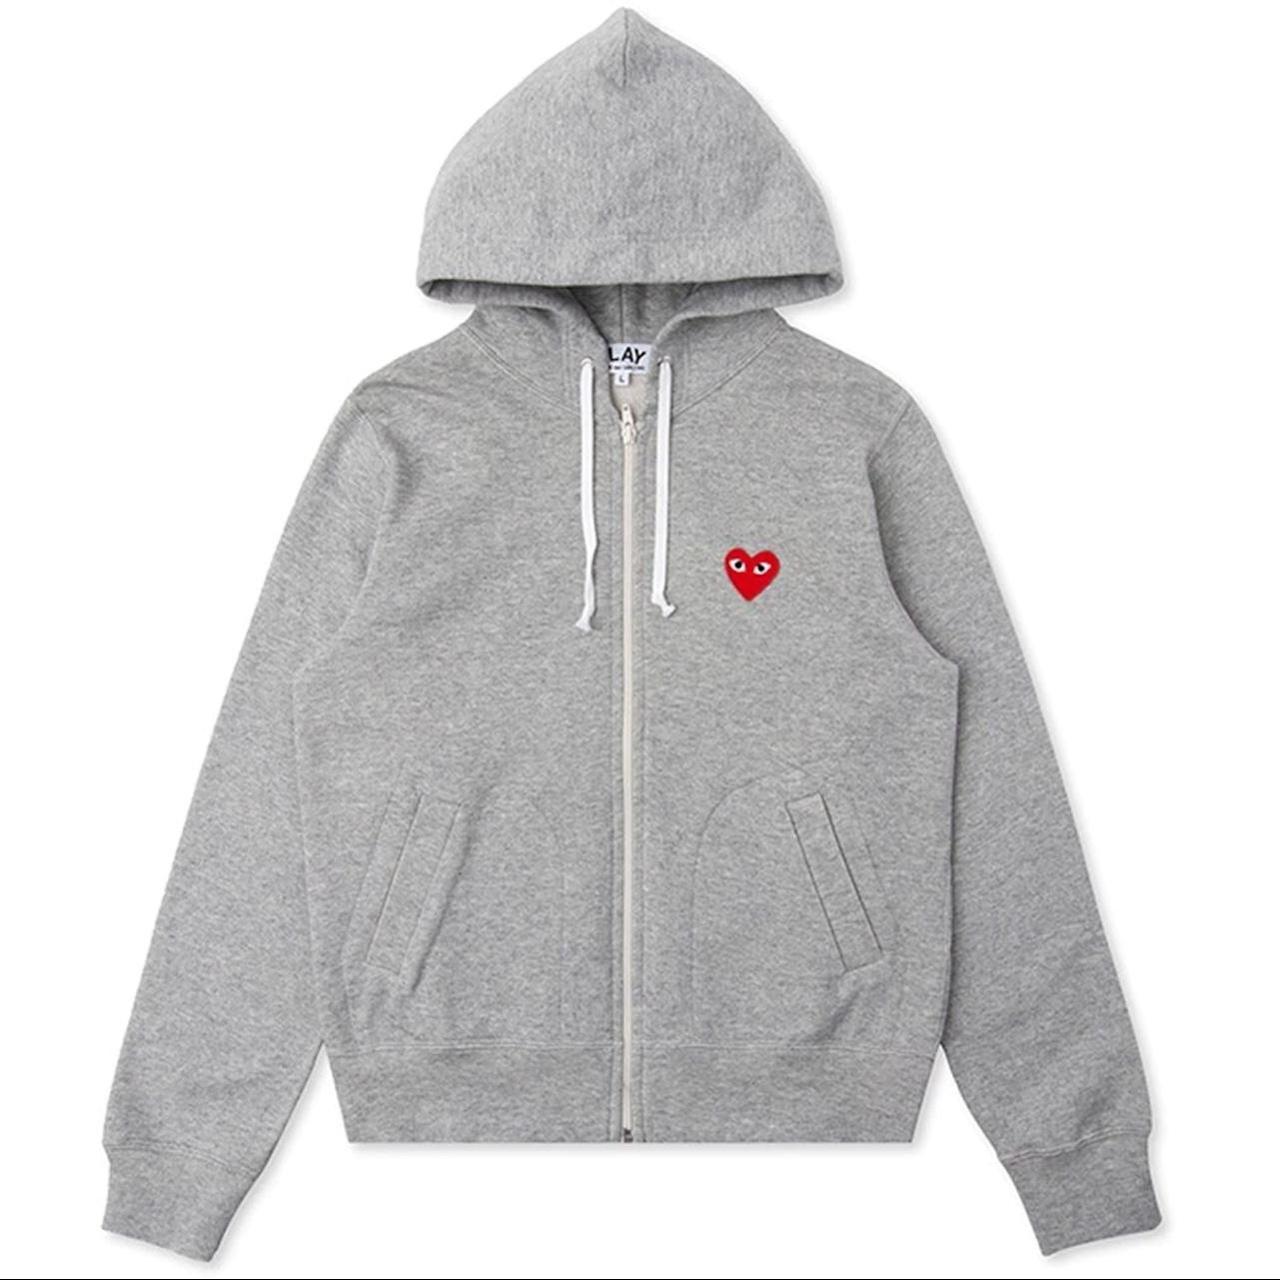 Comme des Garçons Play Men's Grey and Red Hoodie